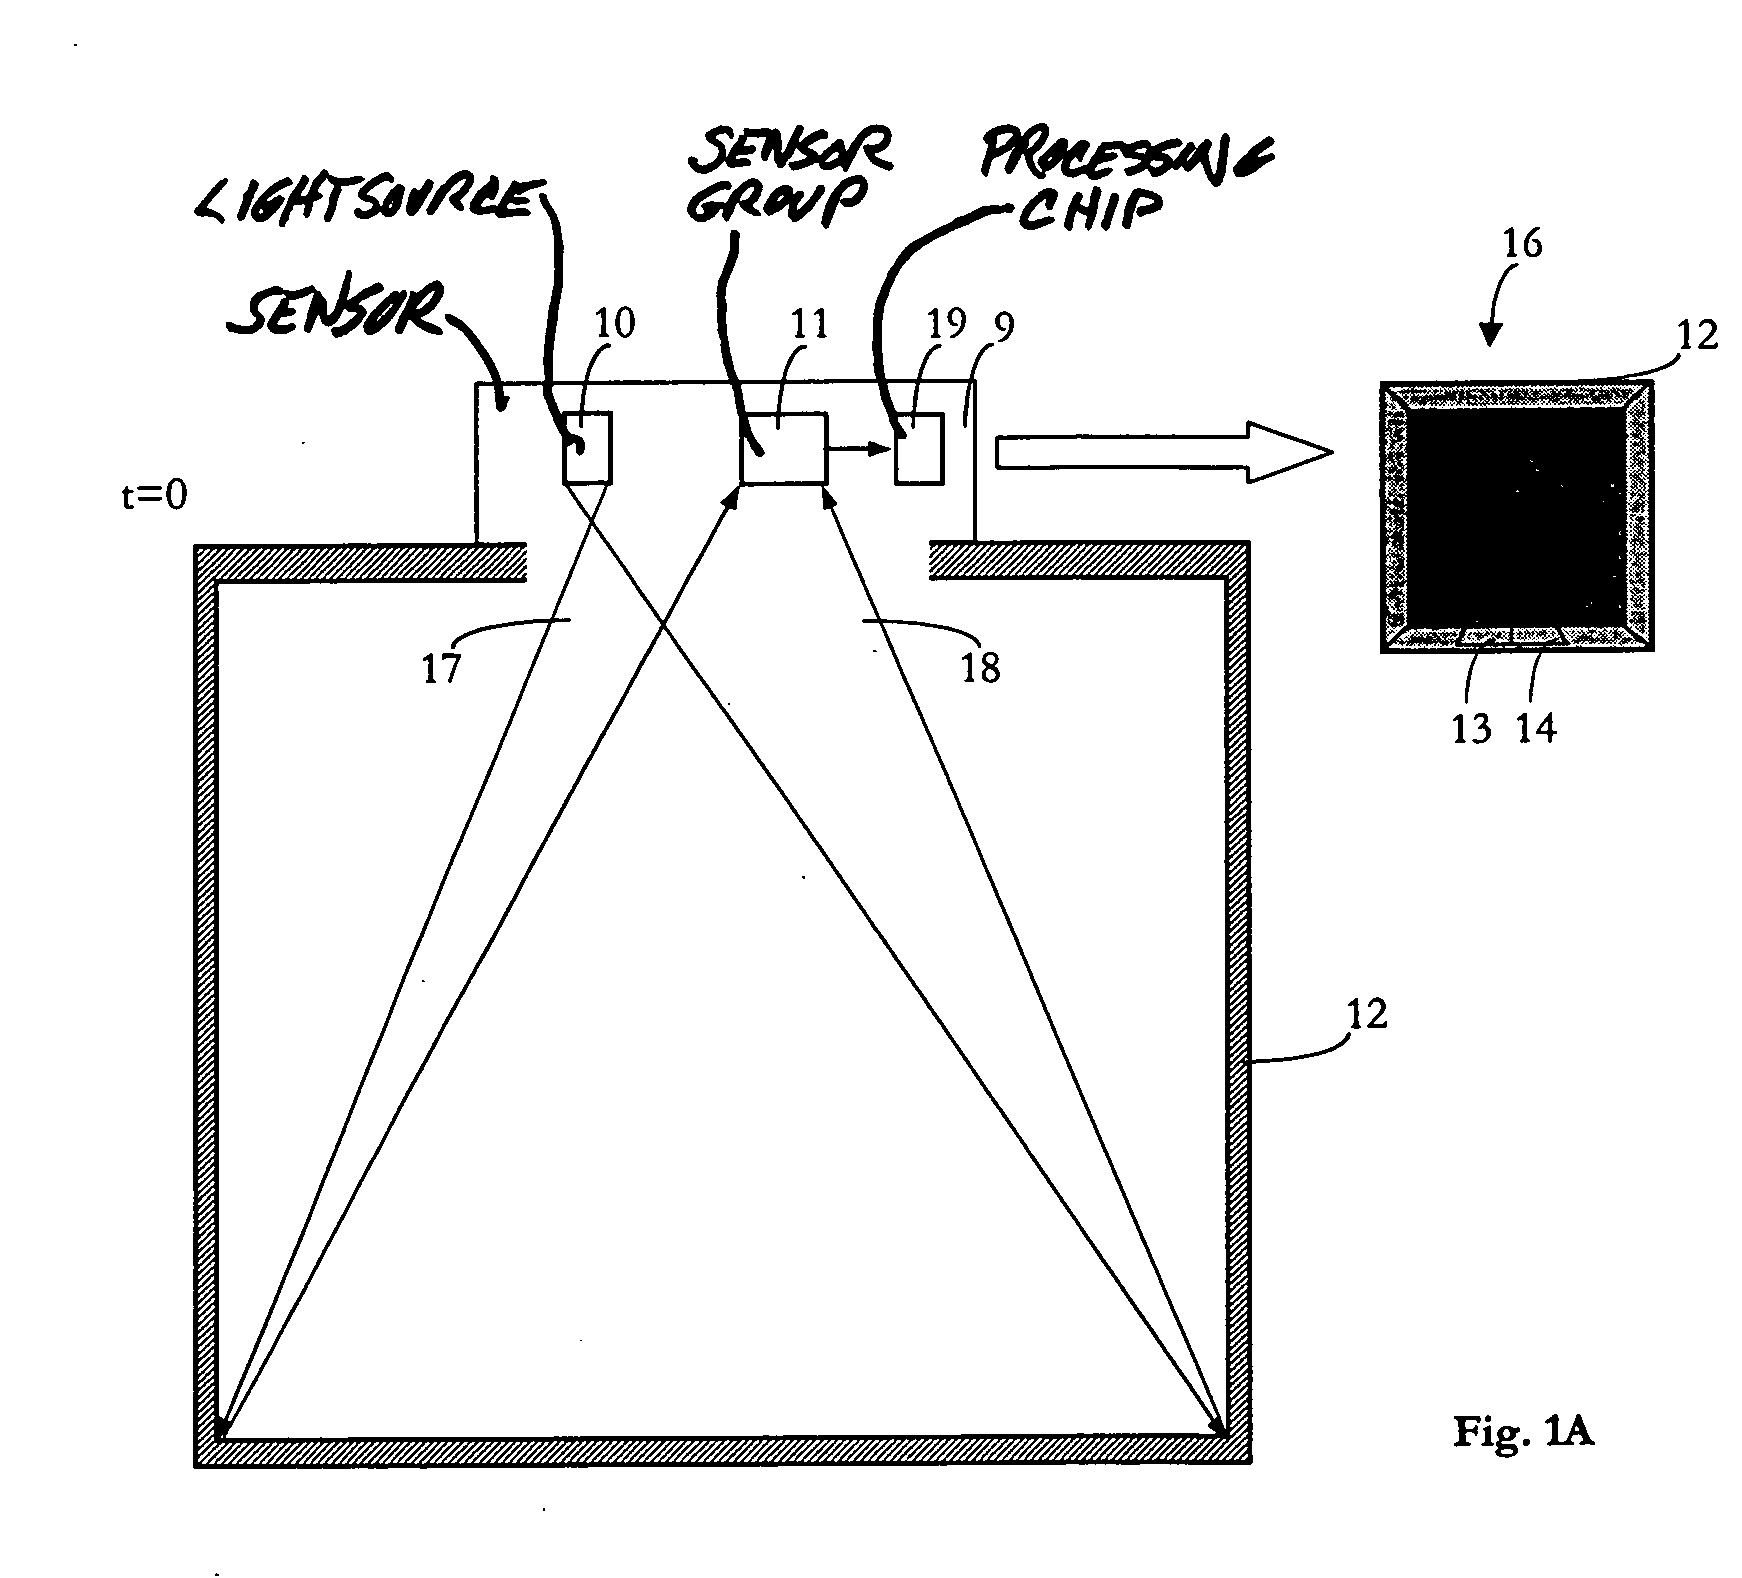 Three-dimensional monitoring in the area of an elevator by means of a three-dimensional sensor